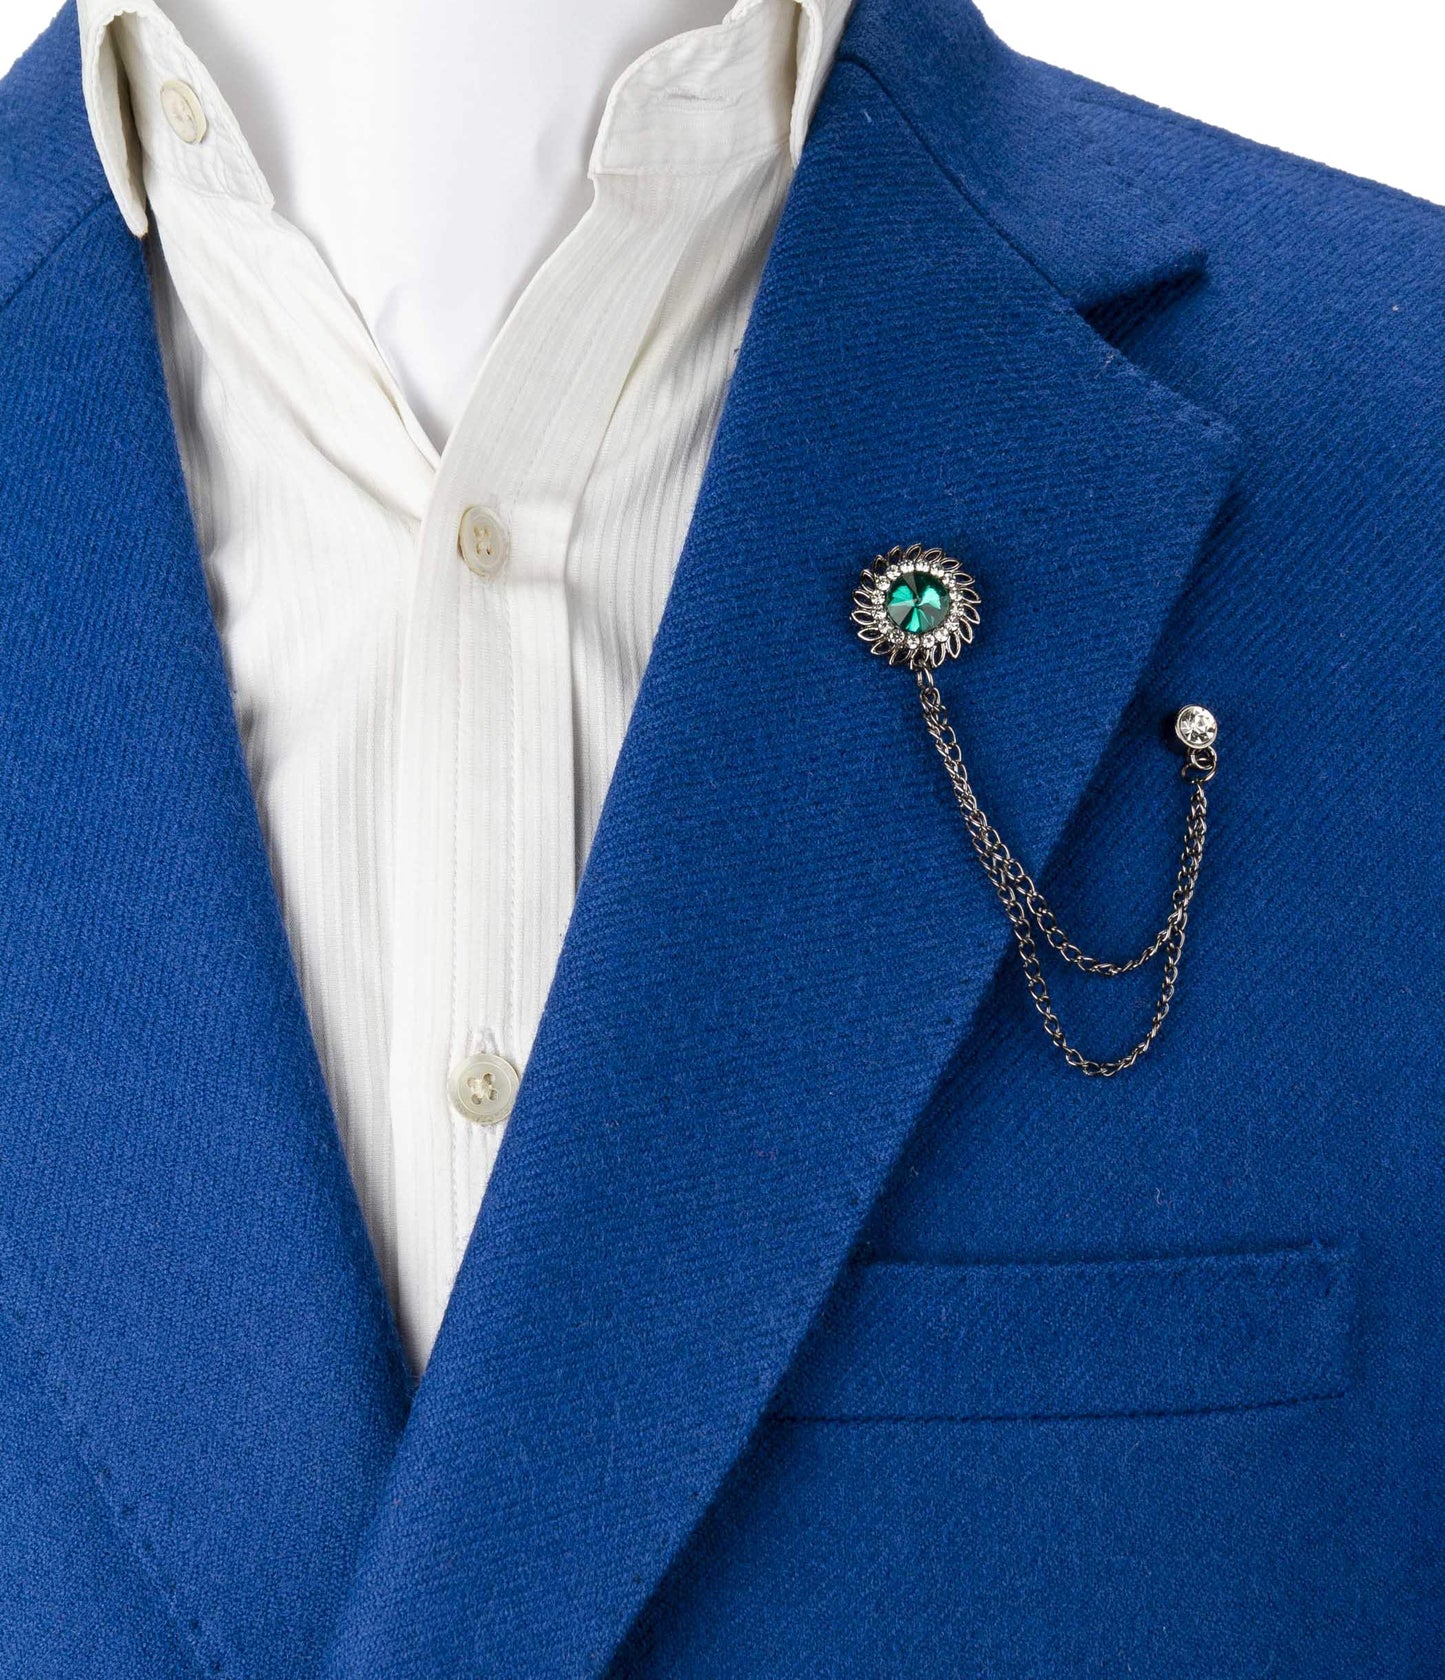 Knighthood Green Stone with Inspired Stone Detailing Hanging Chain Lapel Pin Badge Coat Suit Wedding Gift Party Shirt Collar Accessories Brooch for Men